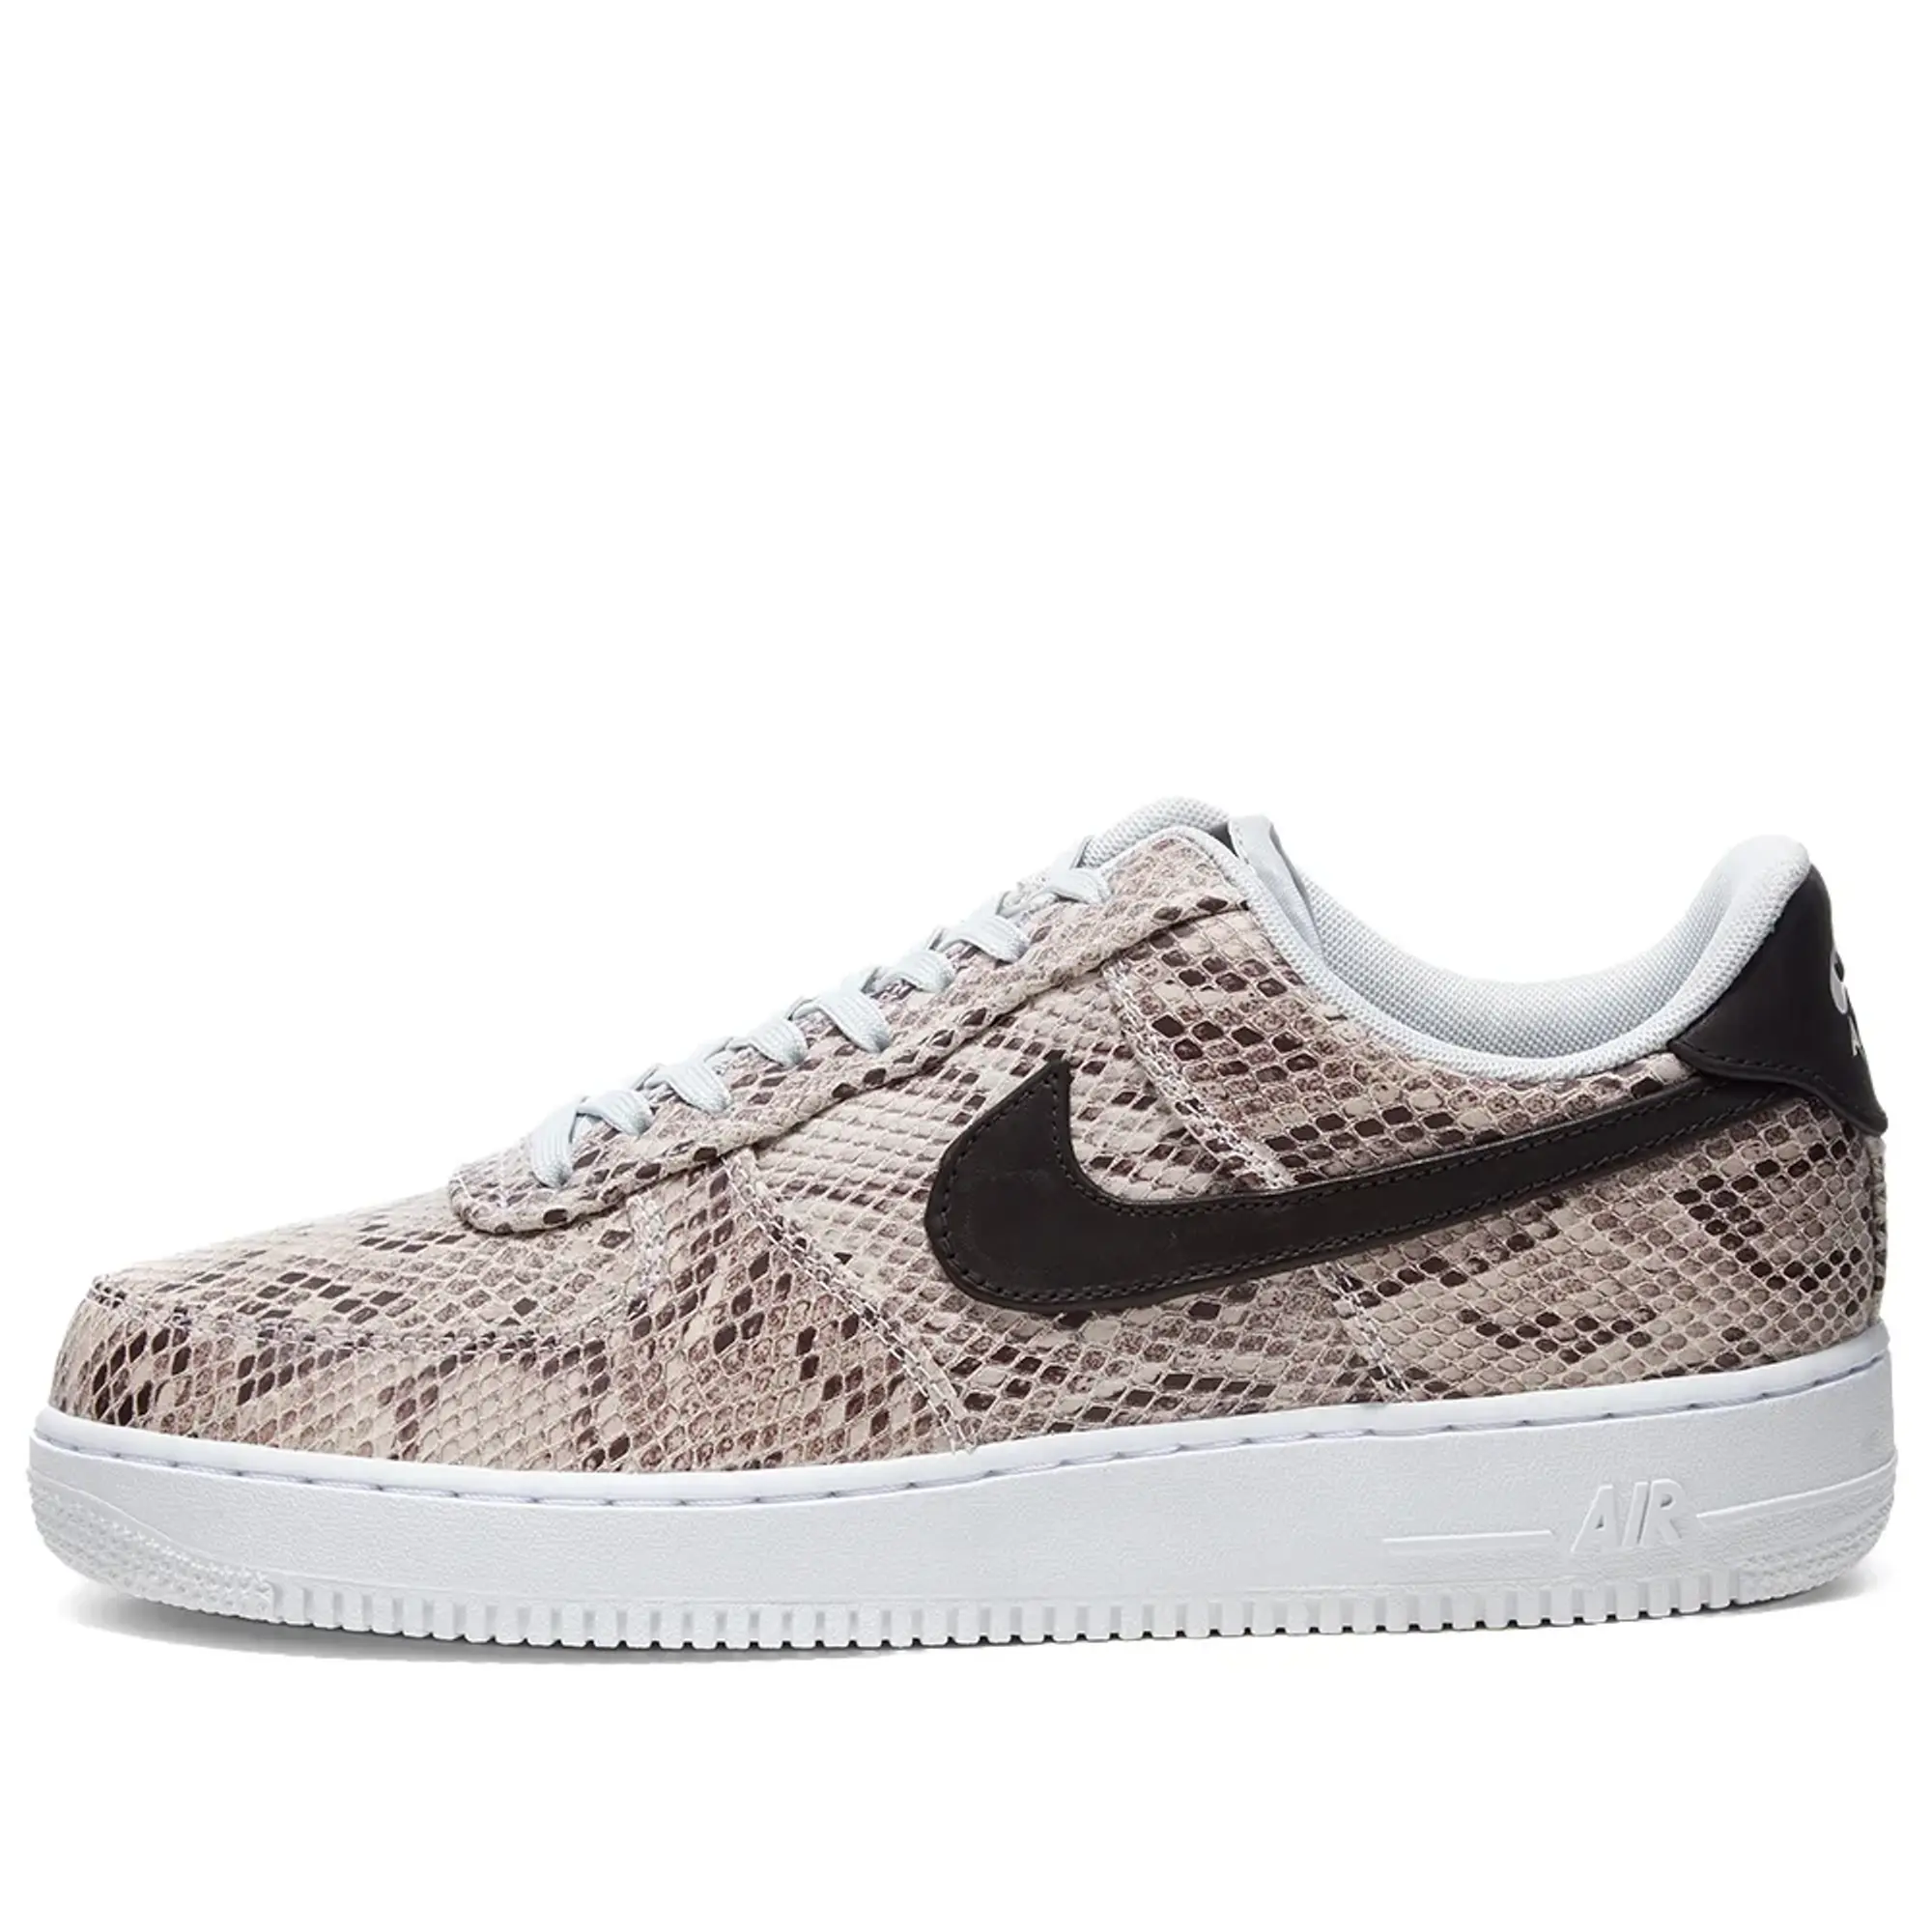 Nike Air Force 1 '07 PRM Snakeskin Shoes